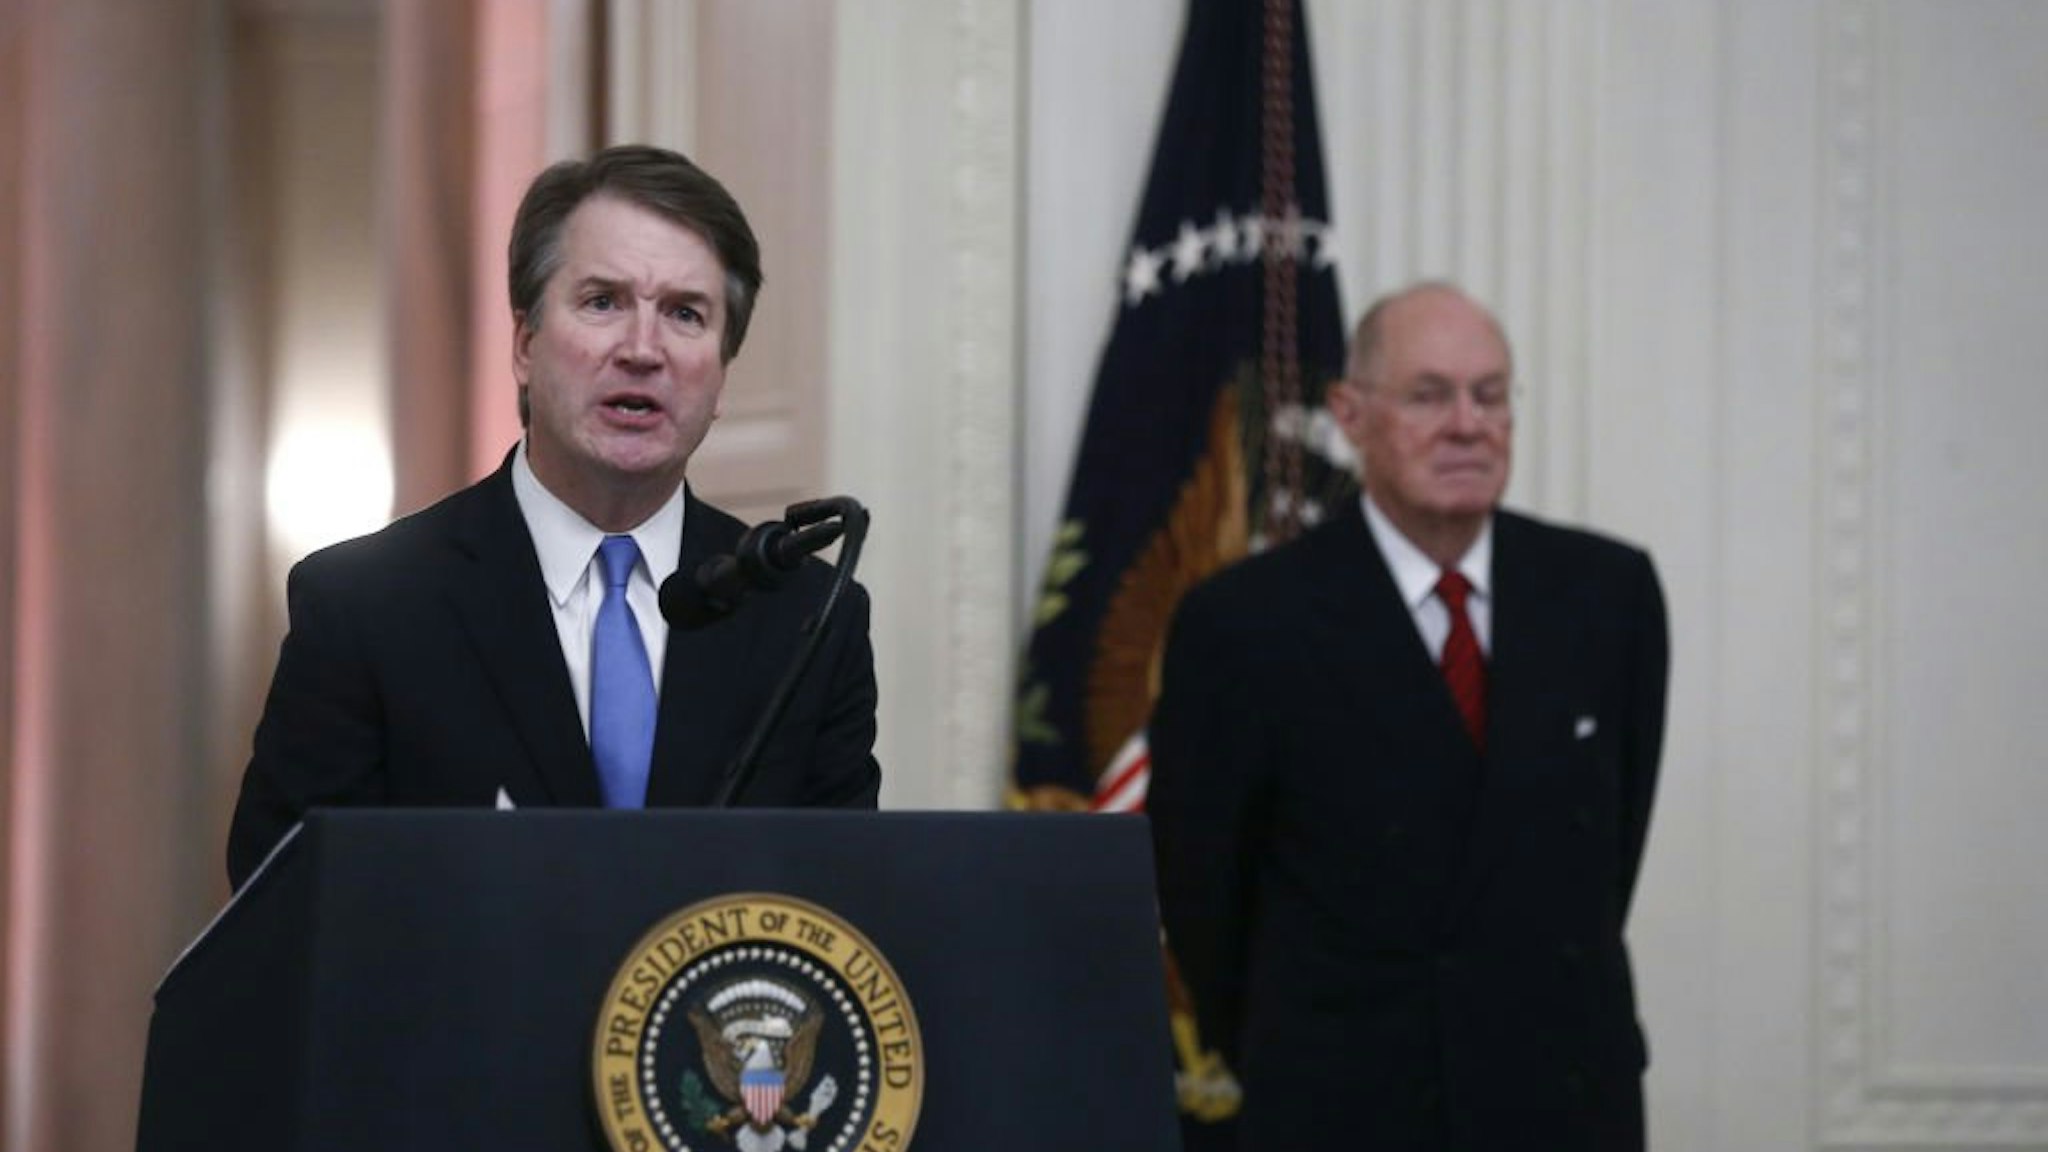 Brett Kavanaugh, associate justice of the U.S. Supreme Court, speaks during a ceremonial swearing-in event in the East Room of the White House in Washington, D.C., U.S., on Monday, Oct. 8, 2018.